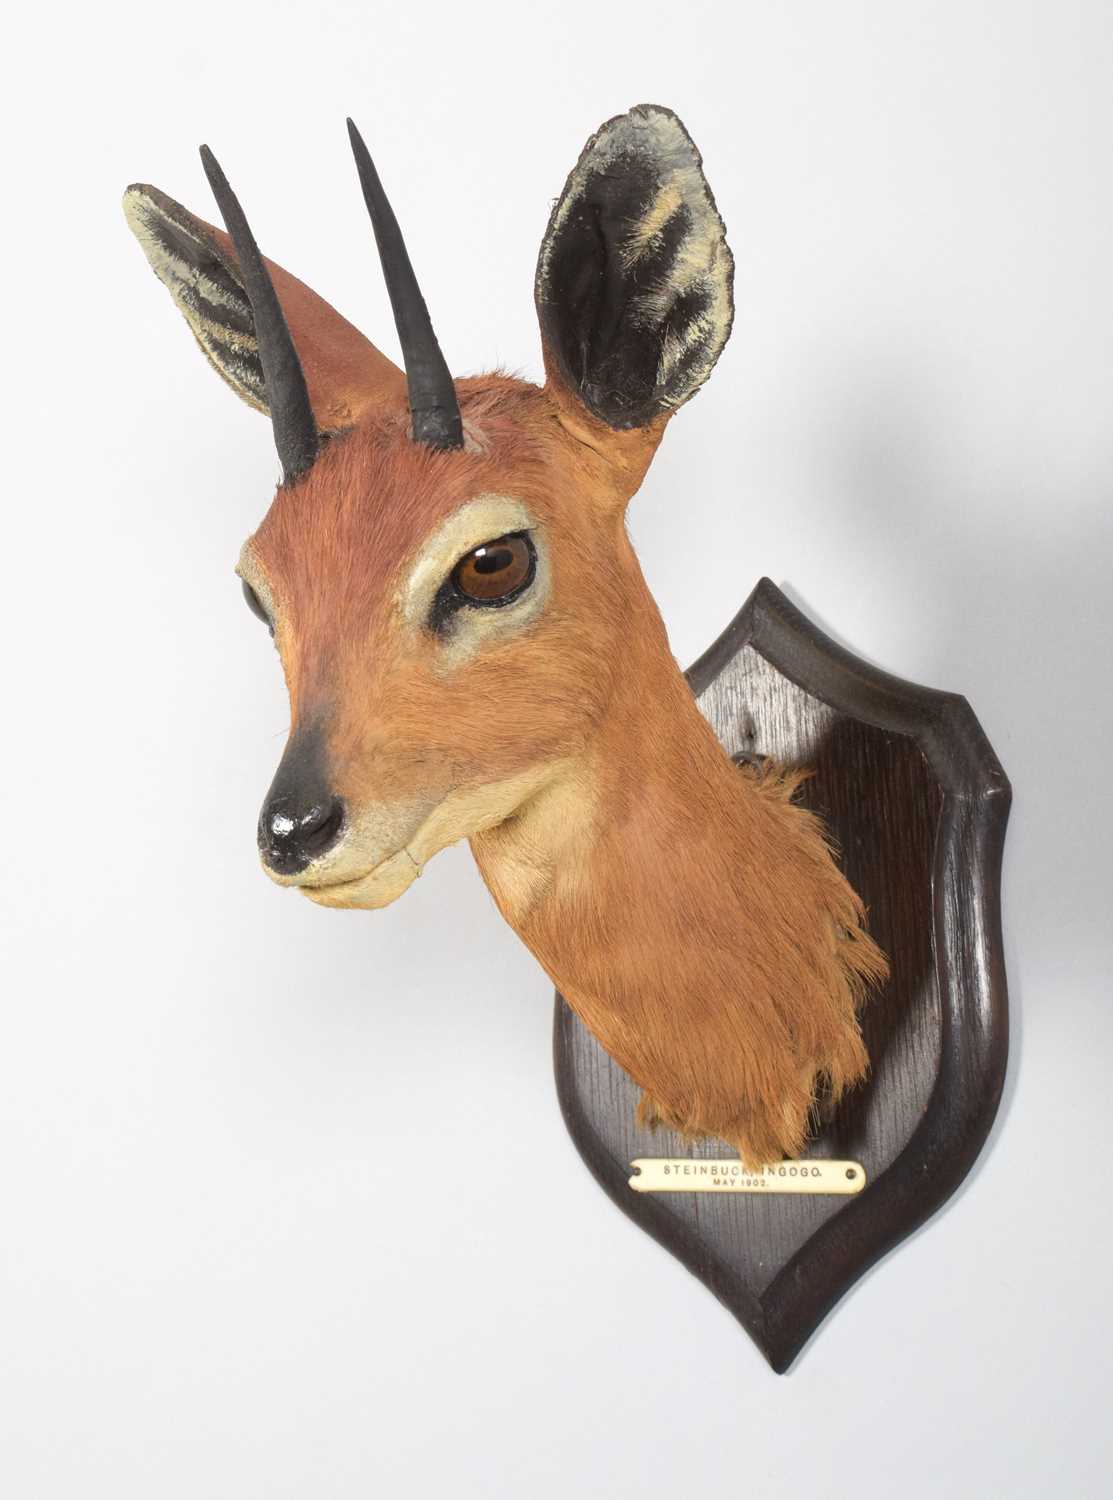 Taxidermy: South African Steenbok (Raphicerus campestris campestris), dated 1902, Ingogo, South